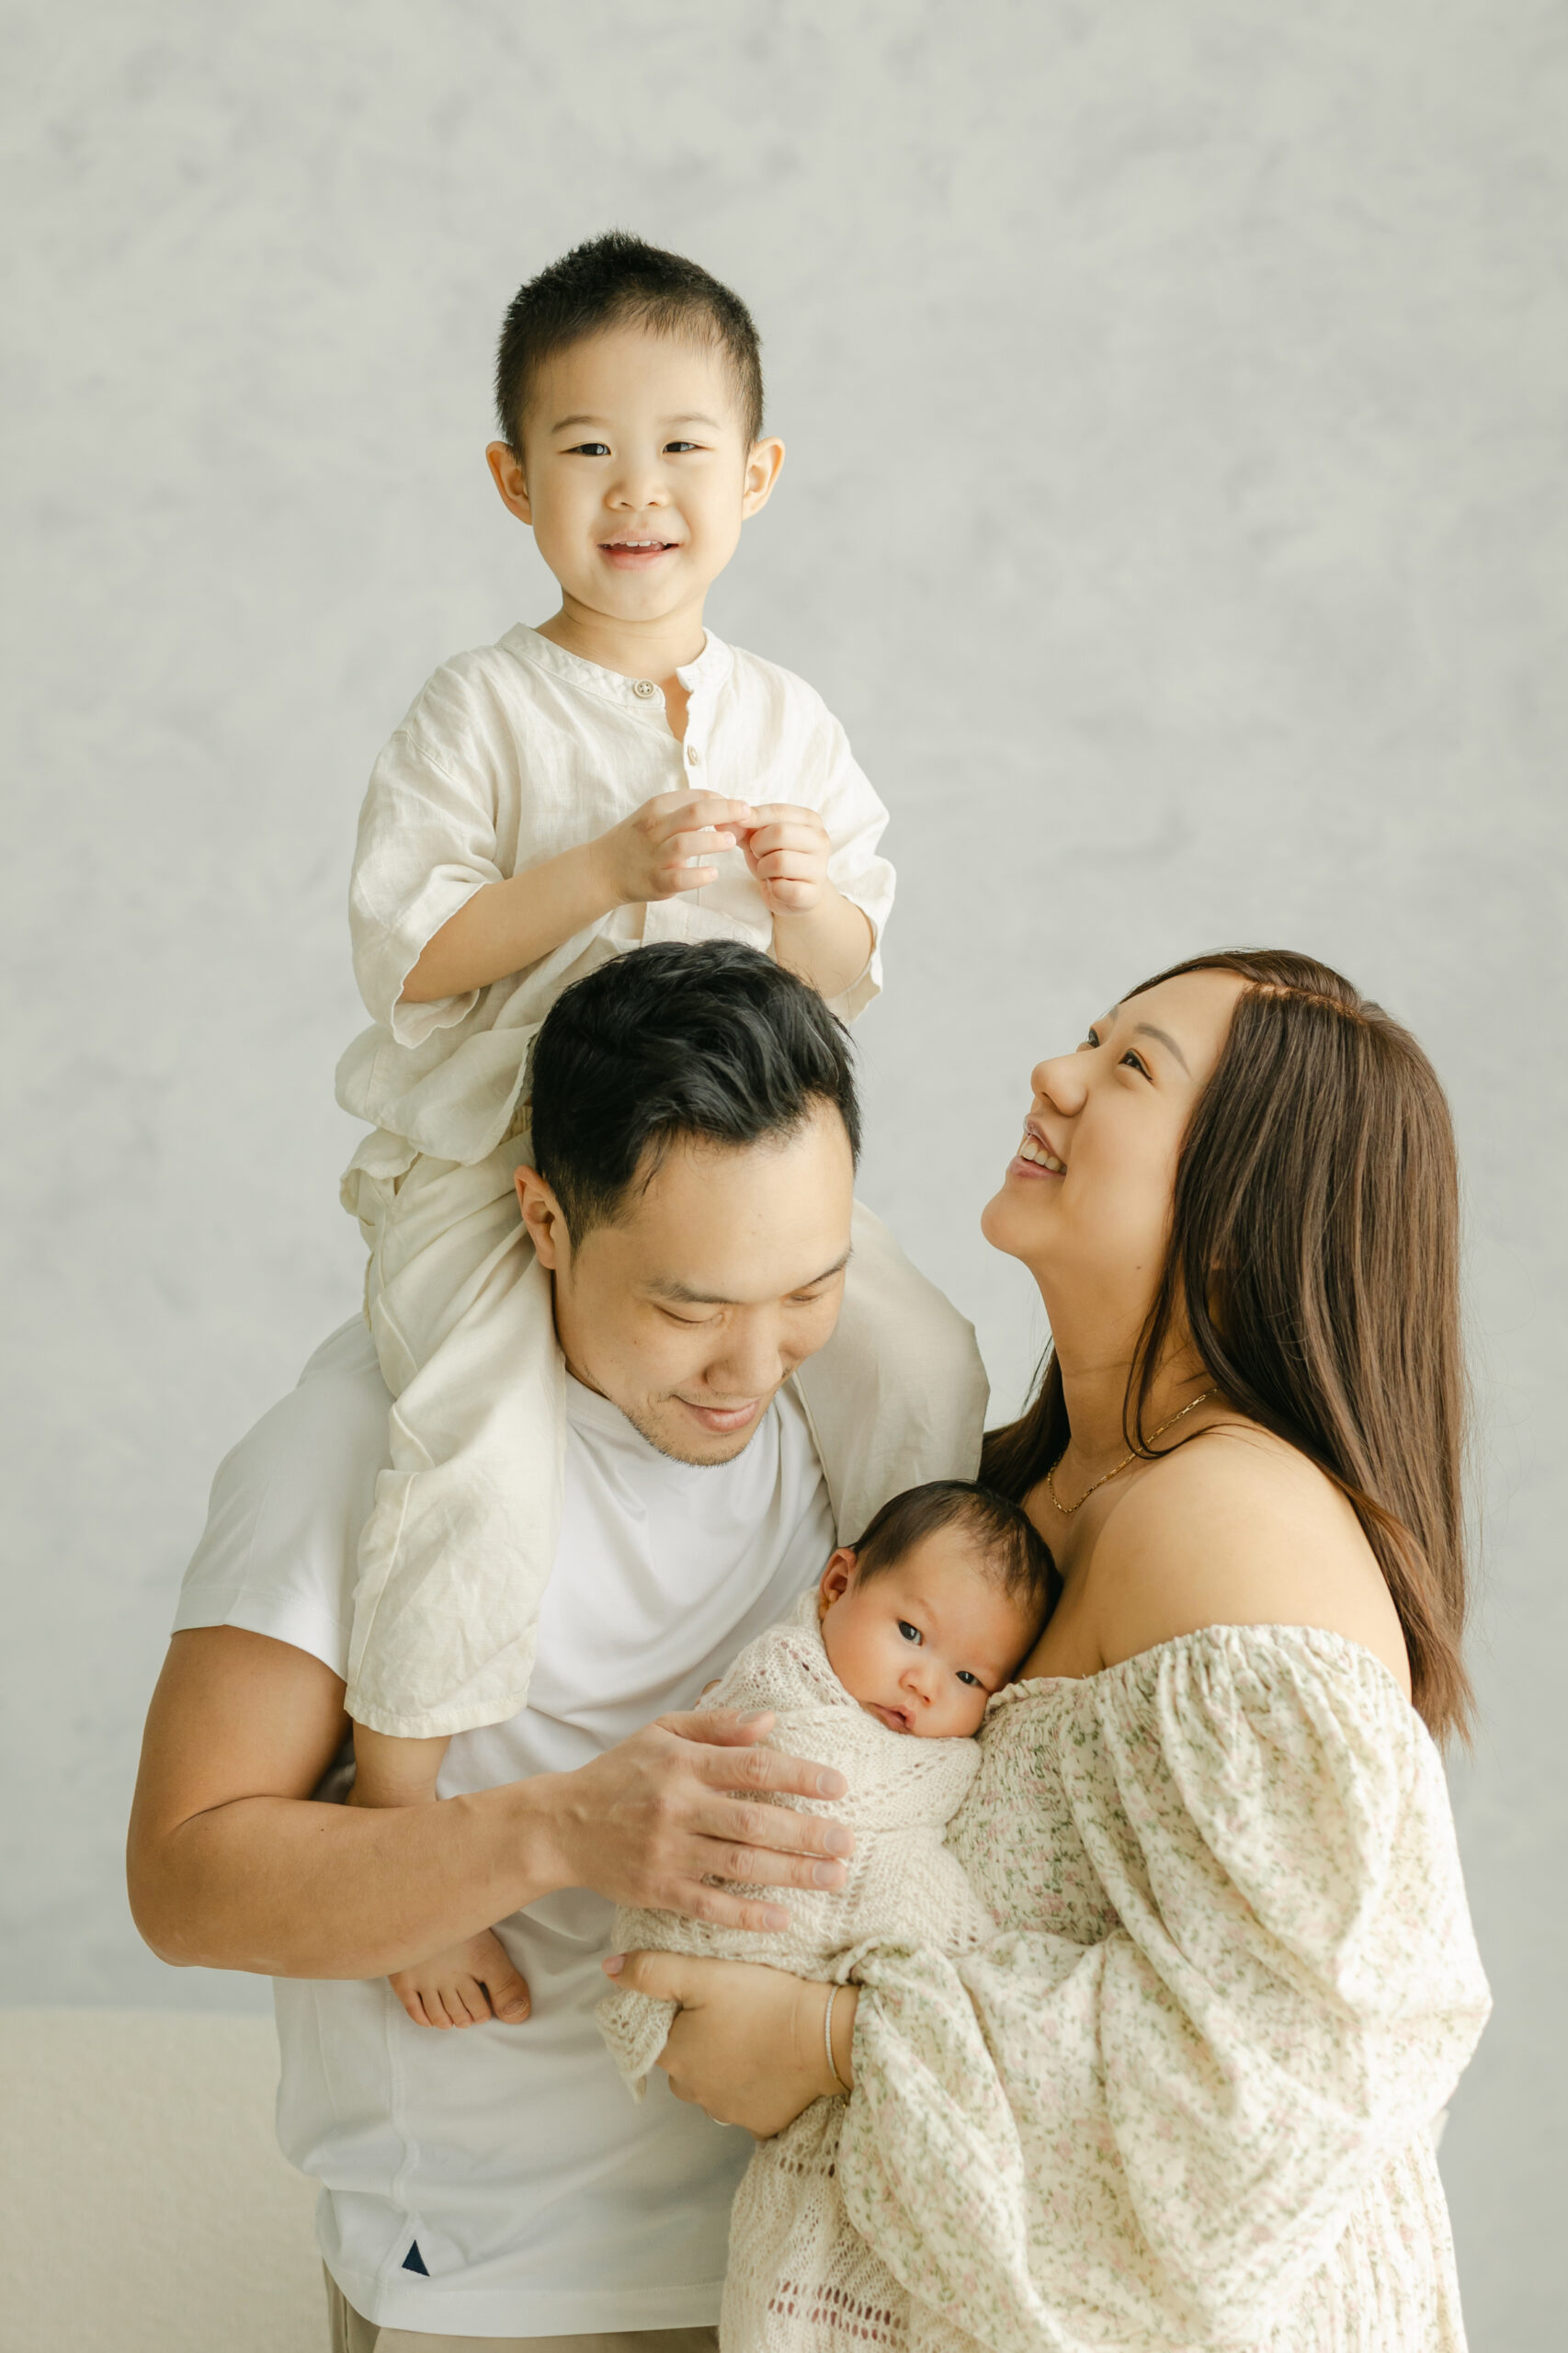 family photo of a boy on his dad's shoulders while mother is holding her newborn baby